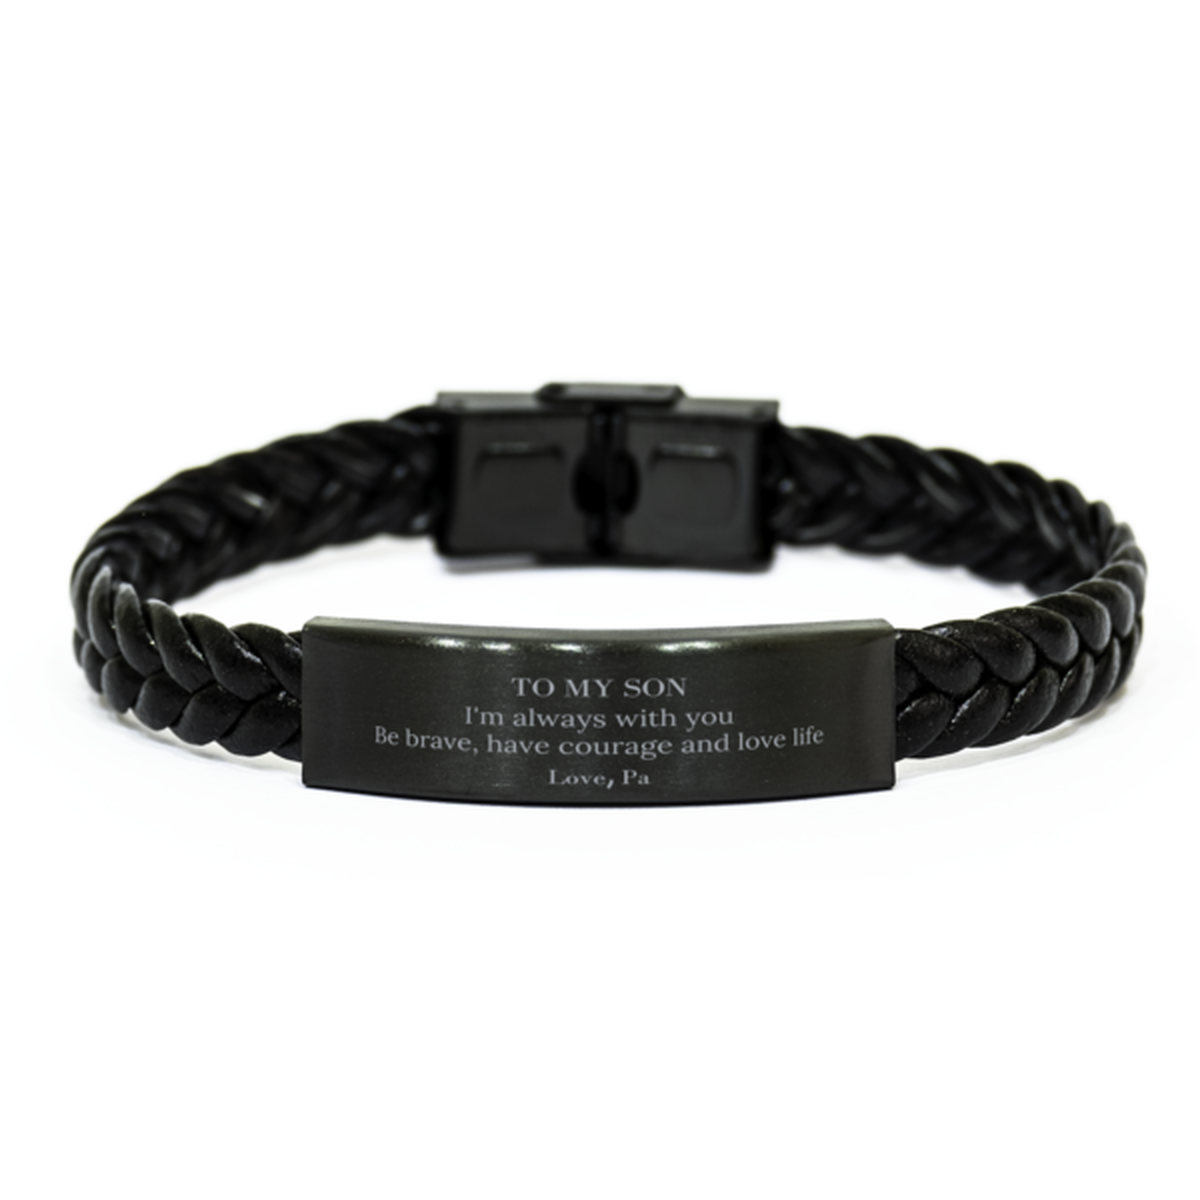 To My Son Gifts from Pa, Unique Braided Leather Bracelet Inspirational Christmas Birthday Graduation Gifts for Son I'm always with you. Be brave, have courage and love life. Love, Pa